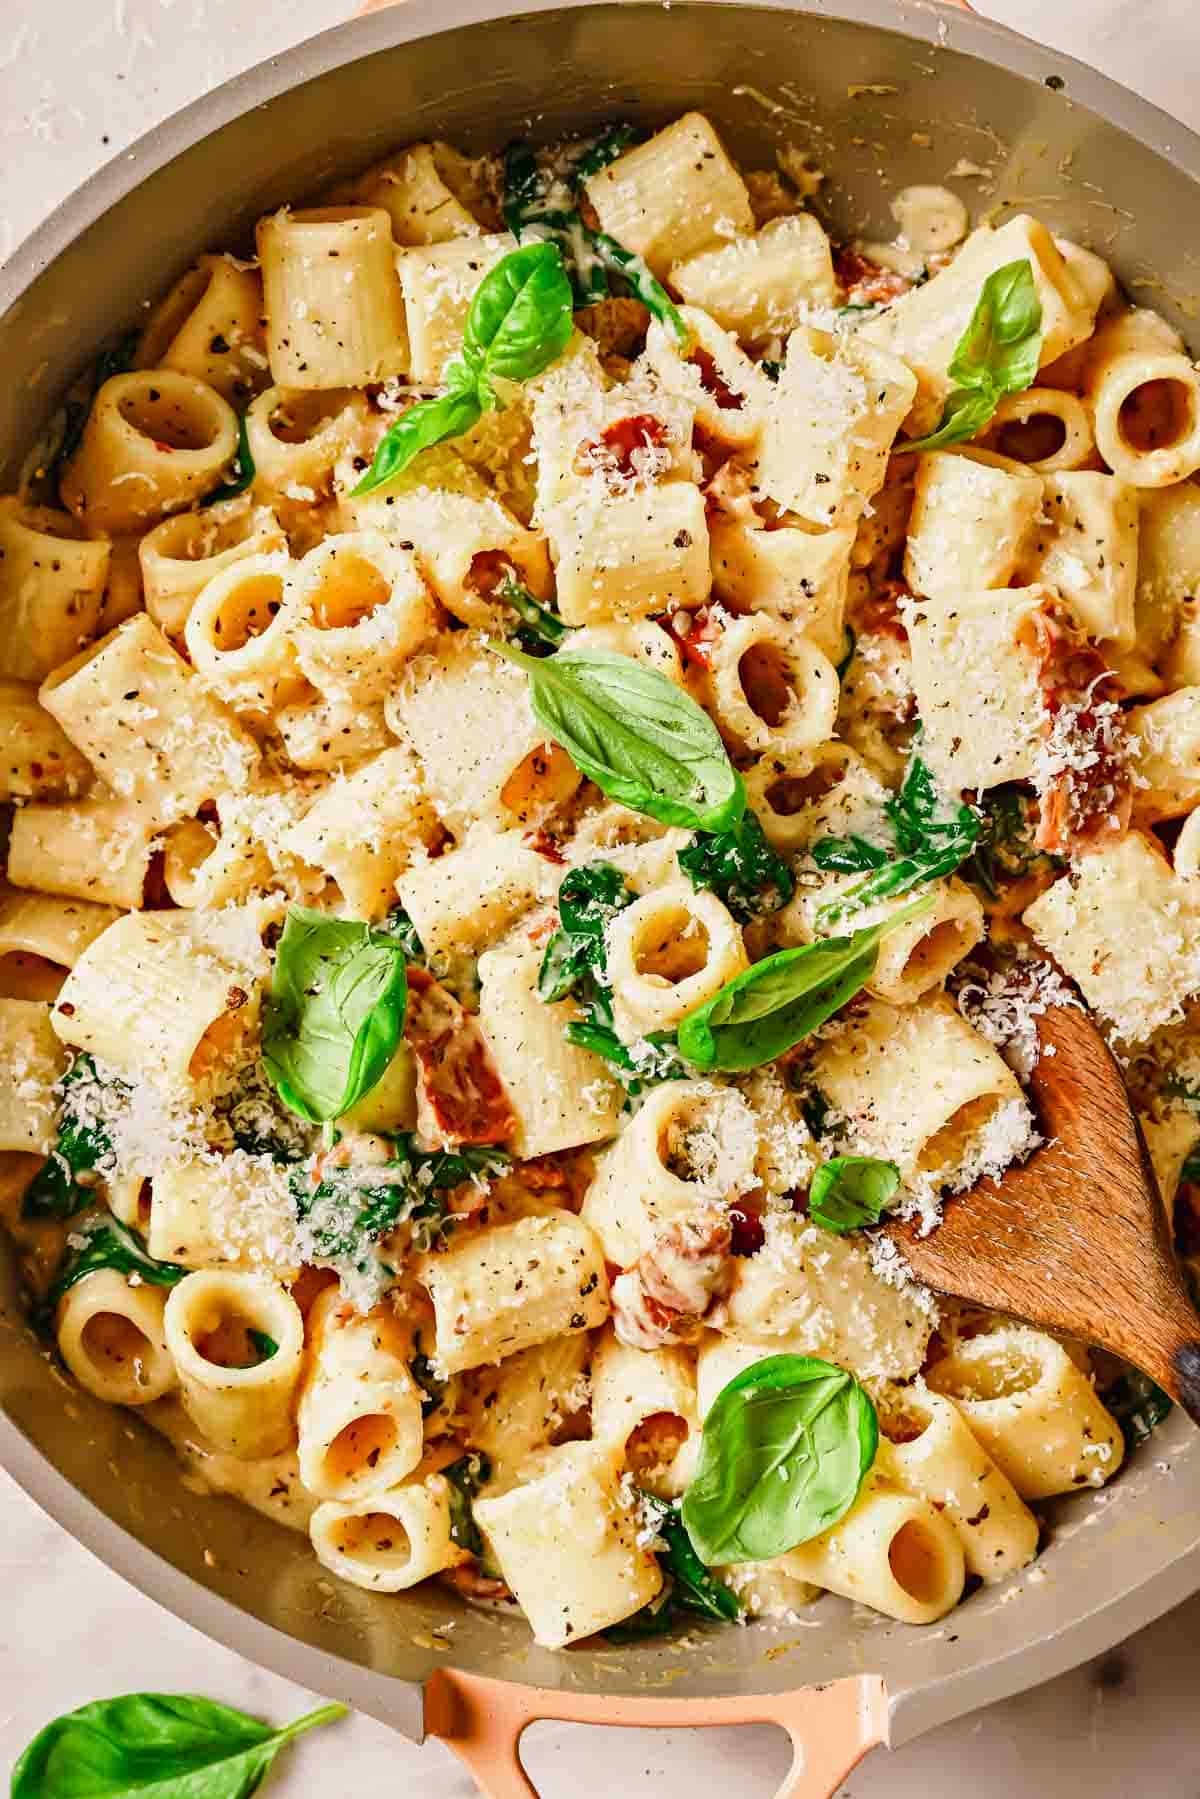 A bowl of rigatoni pasta with parmesan cheese, basil, and wooden spoon.